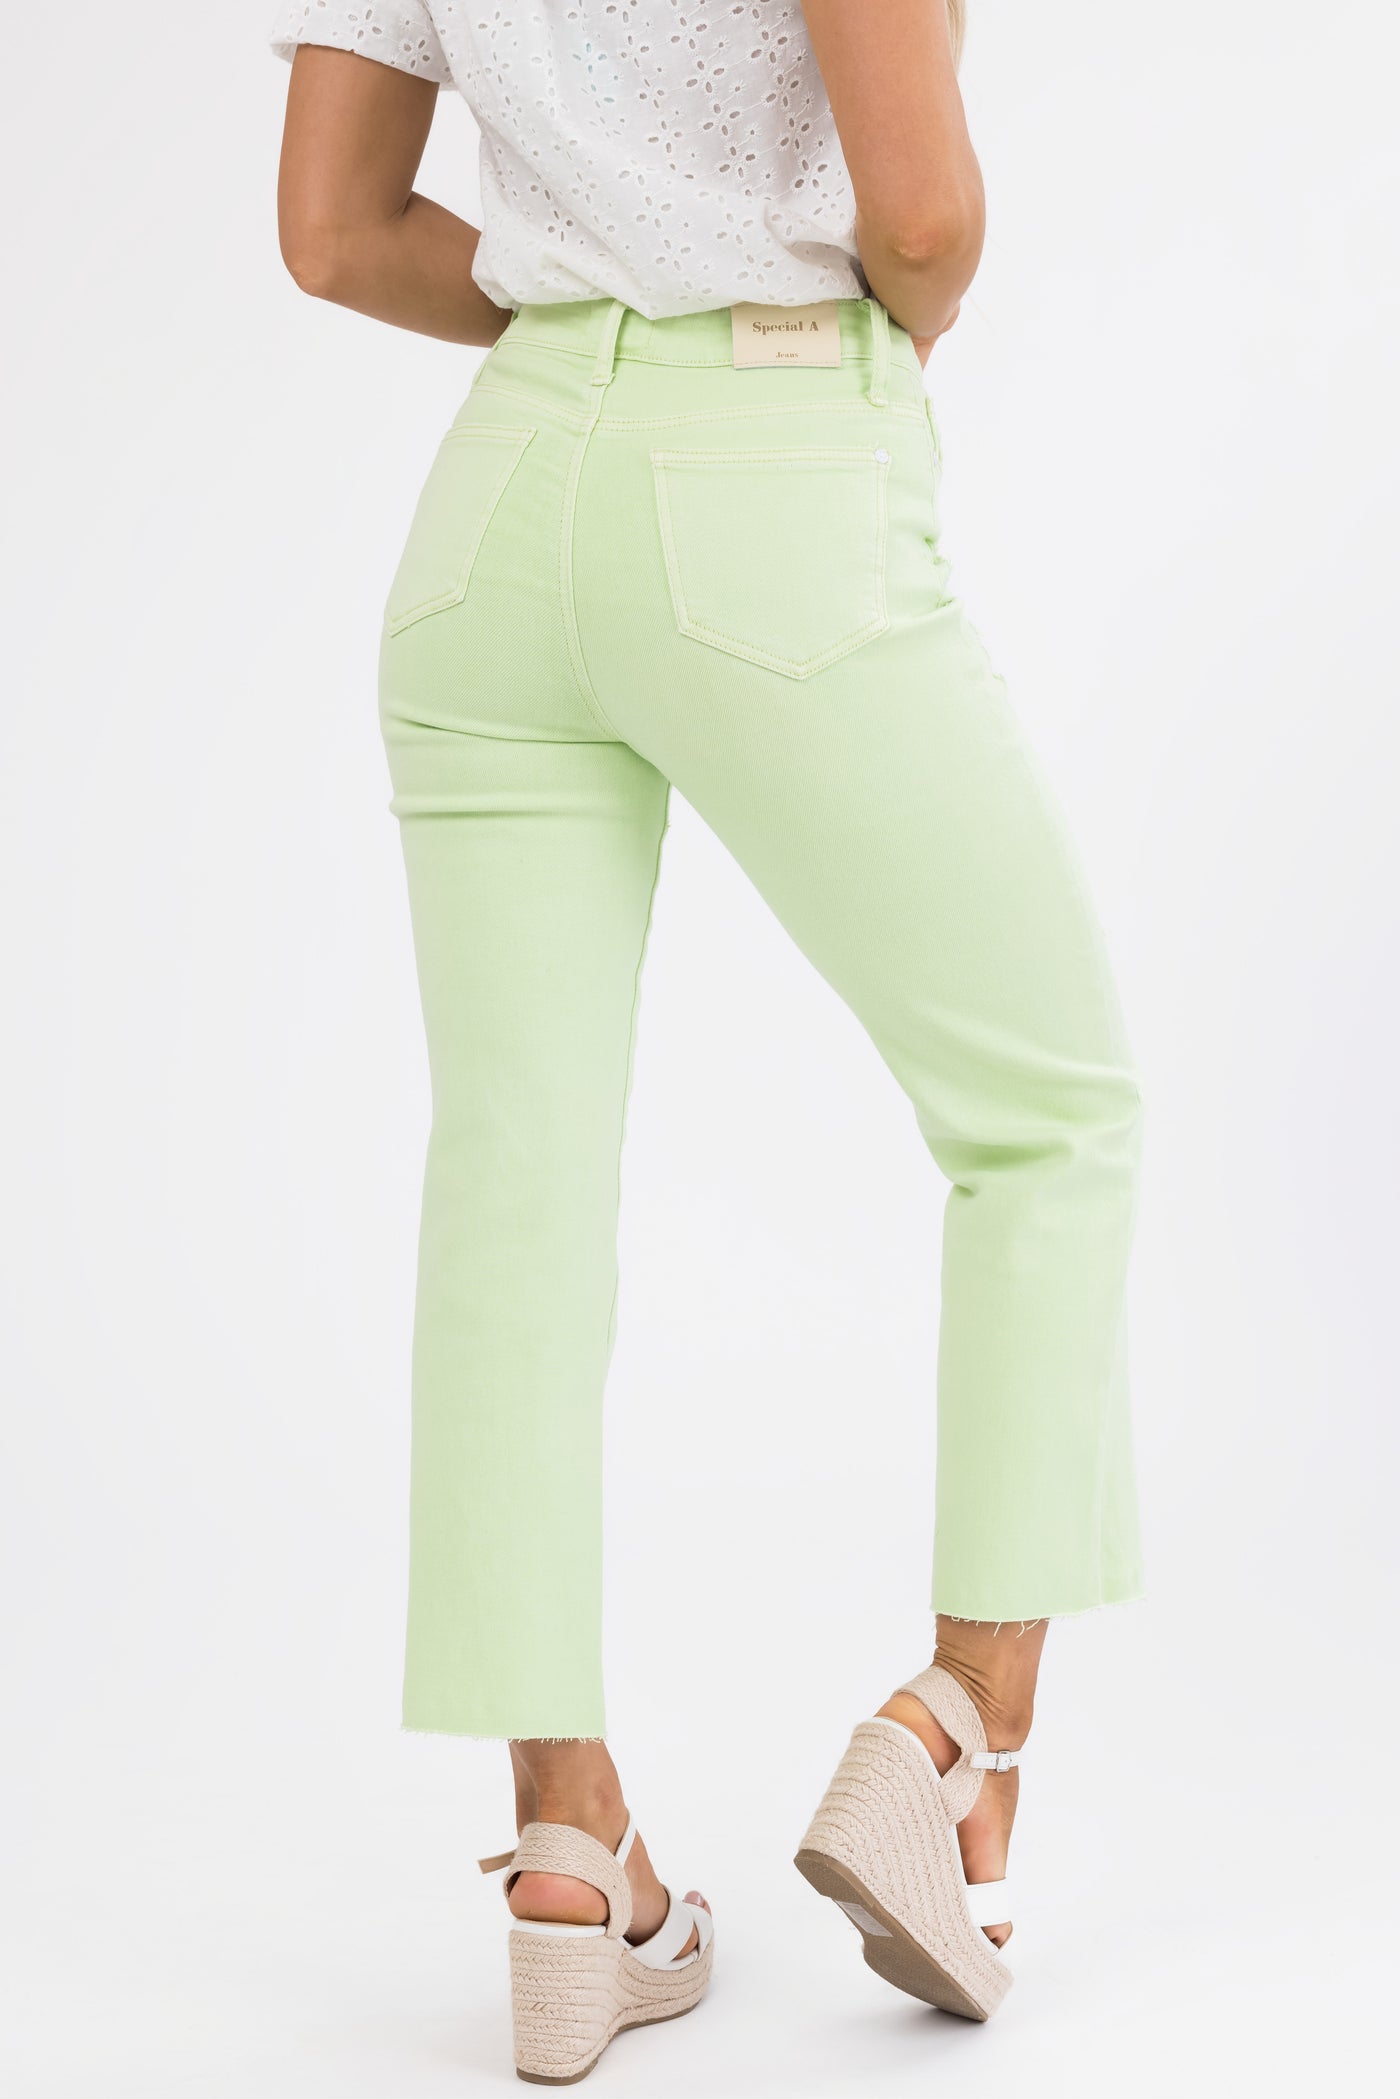 Special A Neon Mint High Rise Straight Leg Jeans